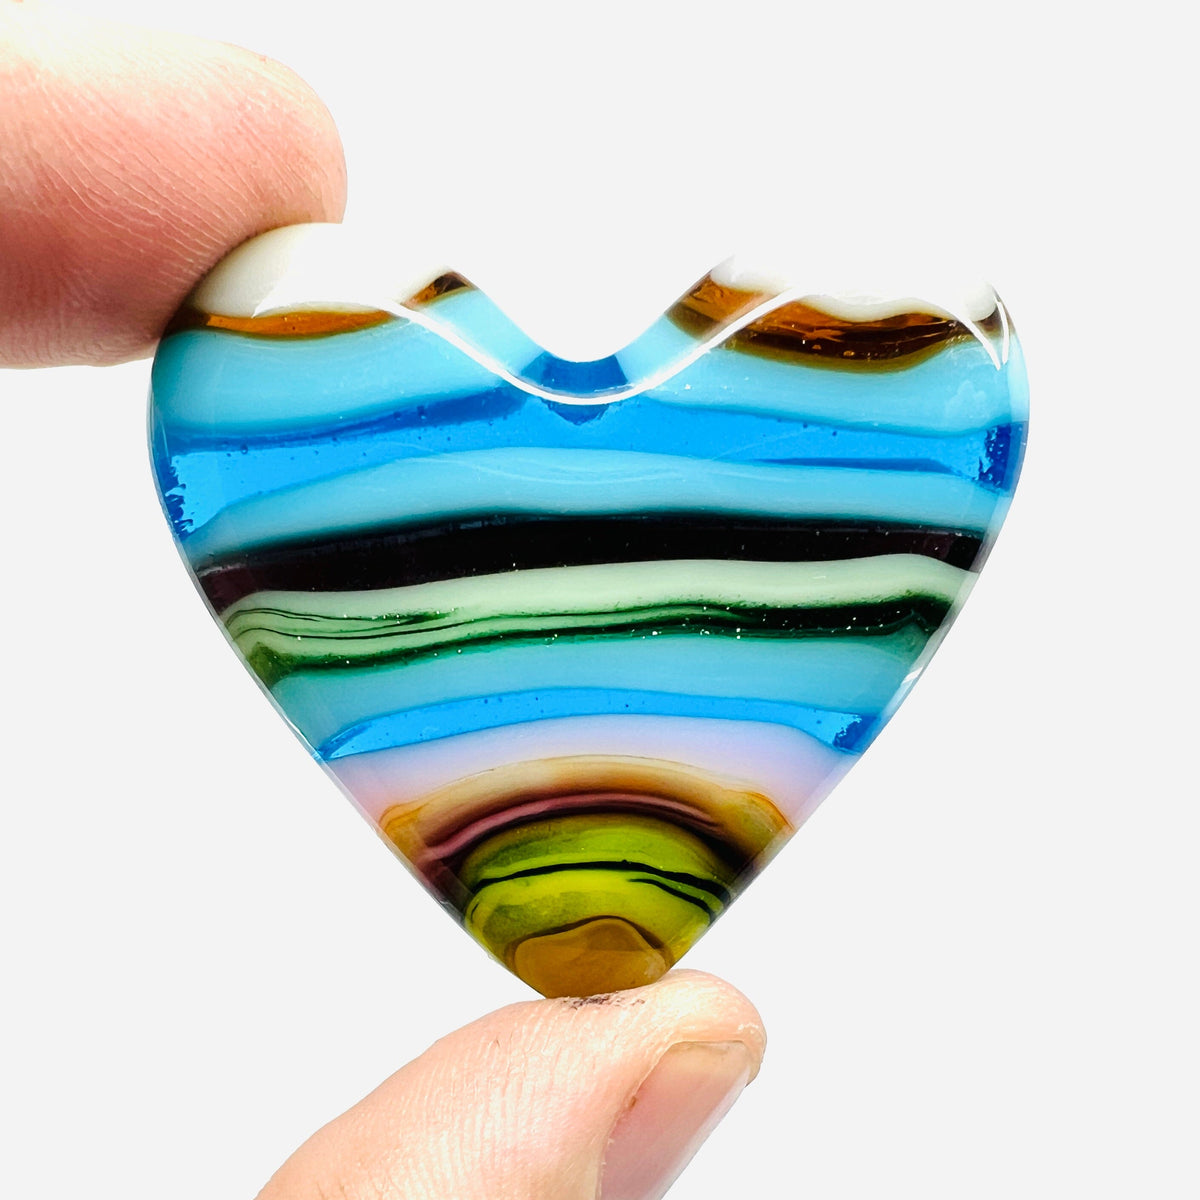 Fused Pocket Heart 218 Miniature Glimmer Glass Gifts 